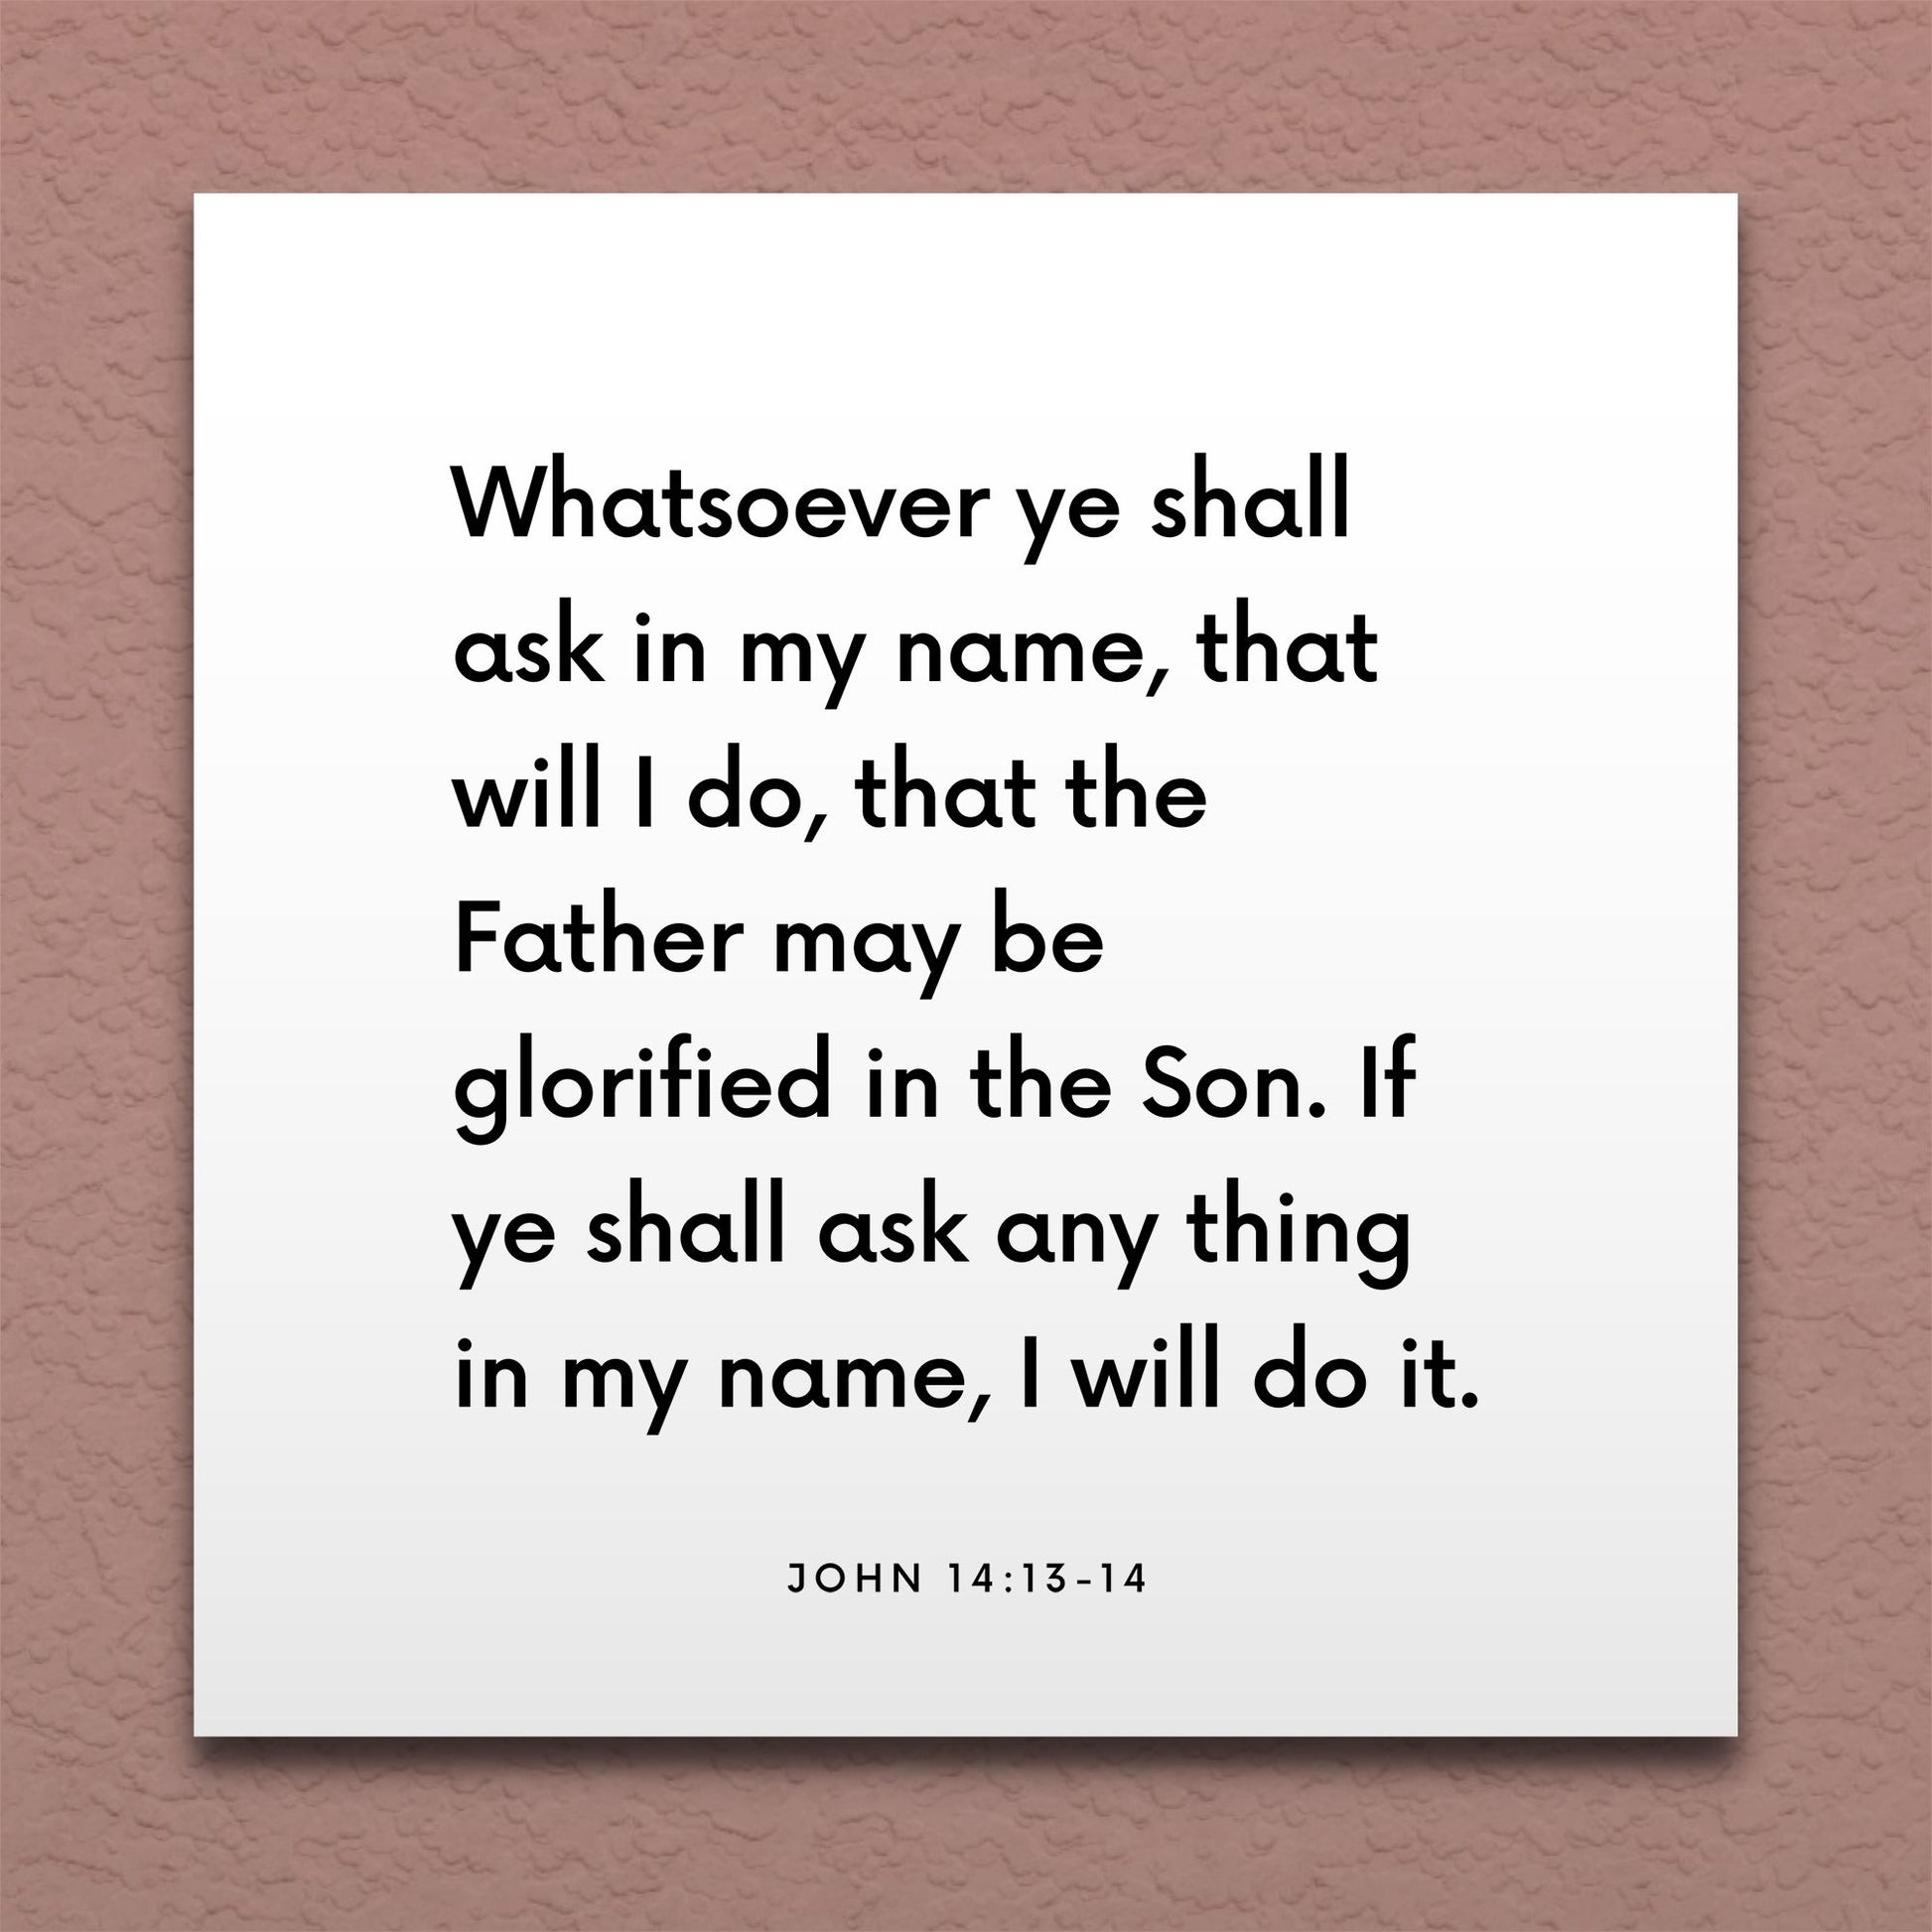 Wall-mounted scripture tile for John 14:13-14 - "Whatsoever ye shall ask in my name, that will I do"